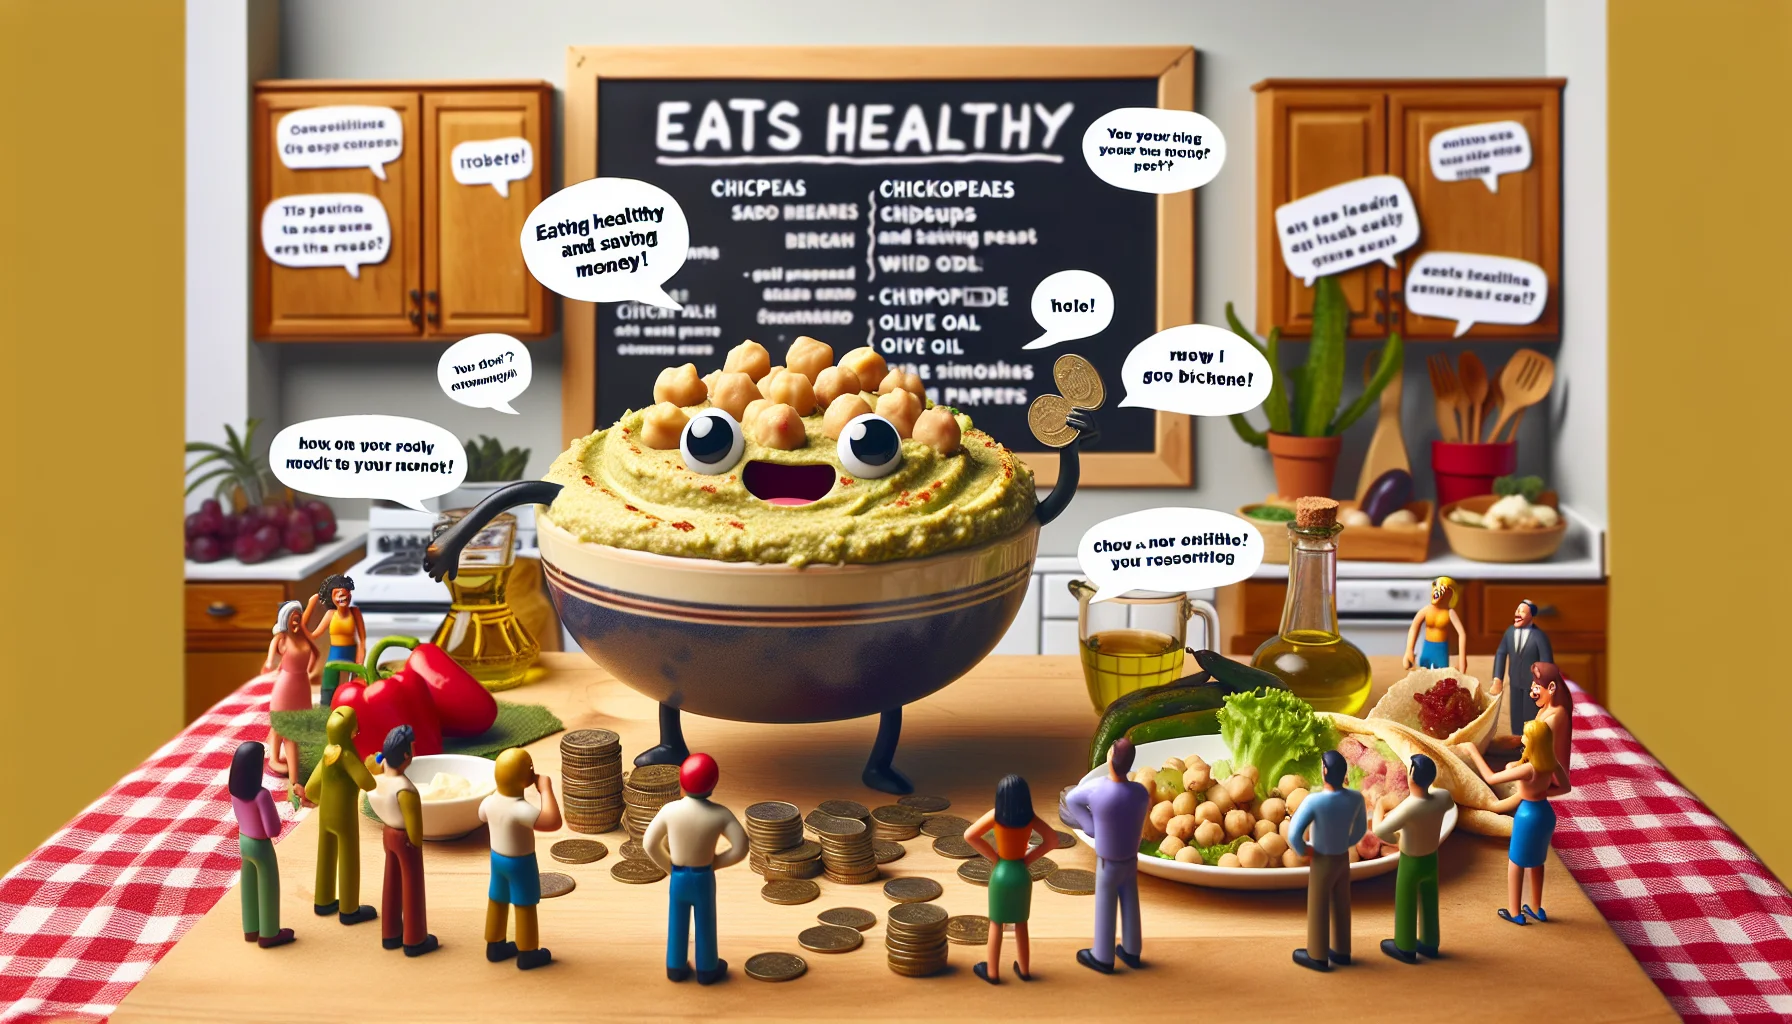 Envision a humorous scene in a home kitchen where a bowl of fresh, homemade Chipotle Hummus takes center stage. Picture the hummus as a charismatic character who's offering a comedic sales pitch about eating healthy and saving money, with speech bubbles expressing witty remarks. To establish realism, the details of the recipe are draped around the scene in a friendly, easy-to-understand way - chickpeas represented as coins, with olive oil flowing like a budget stream, and chipotle peppers adding a spicy twist. Surrounding the scene are mini characters portraying various economic classes, all laughing and enjoying the presentation.